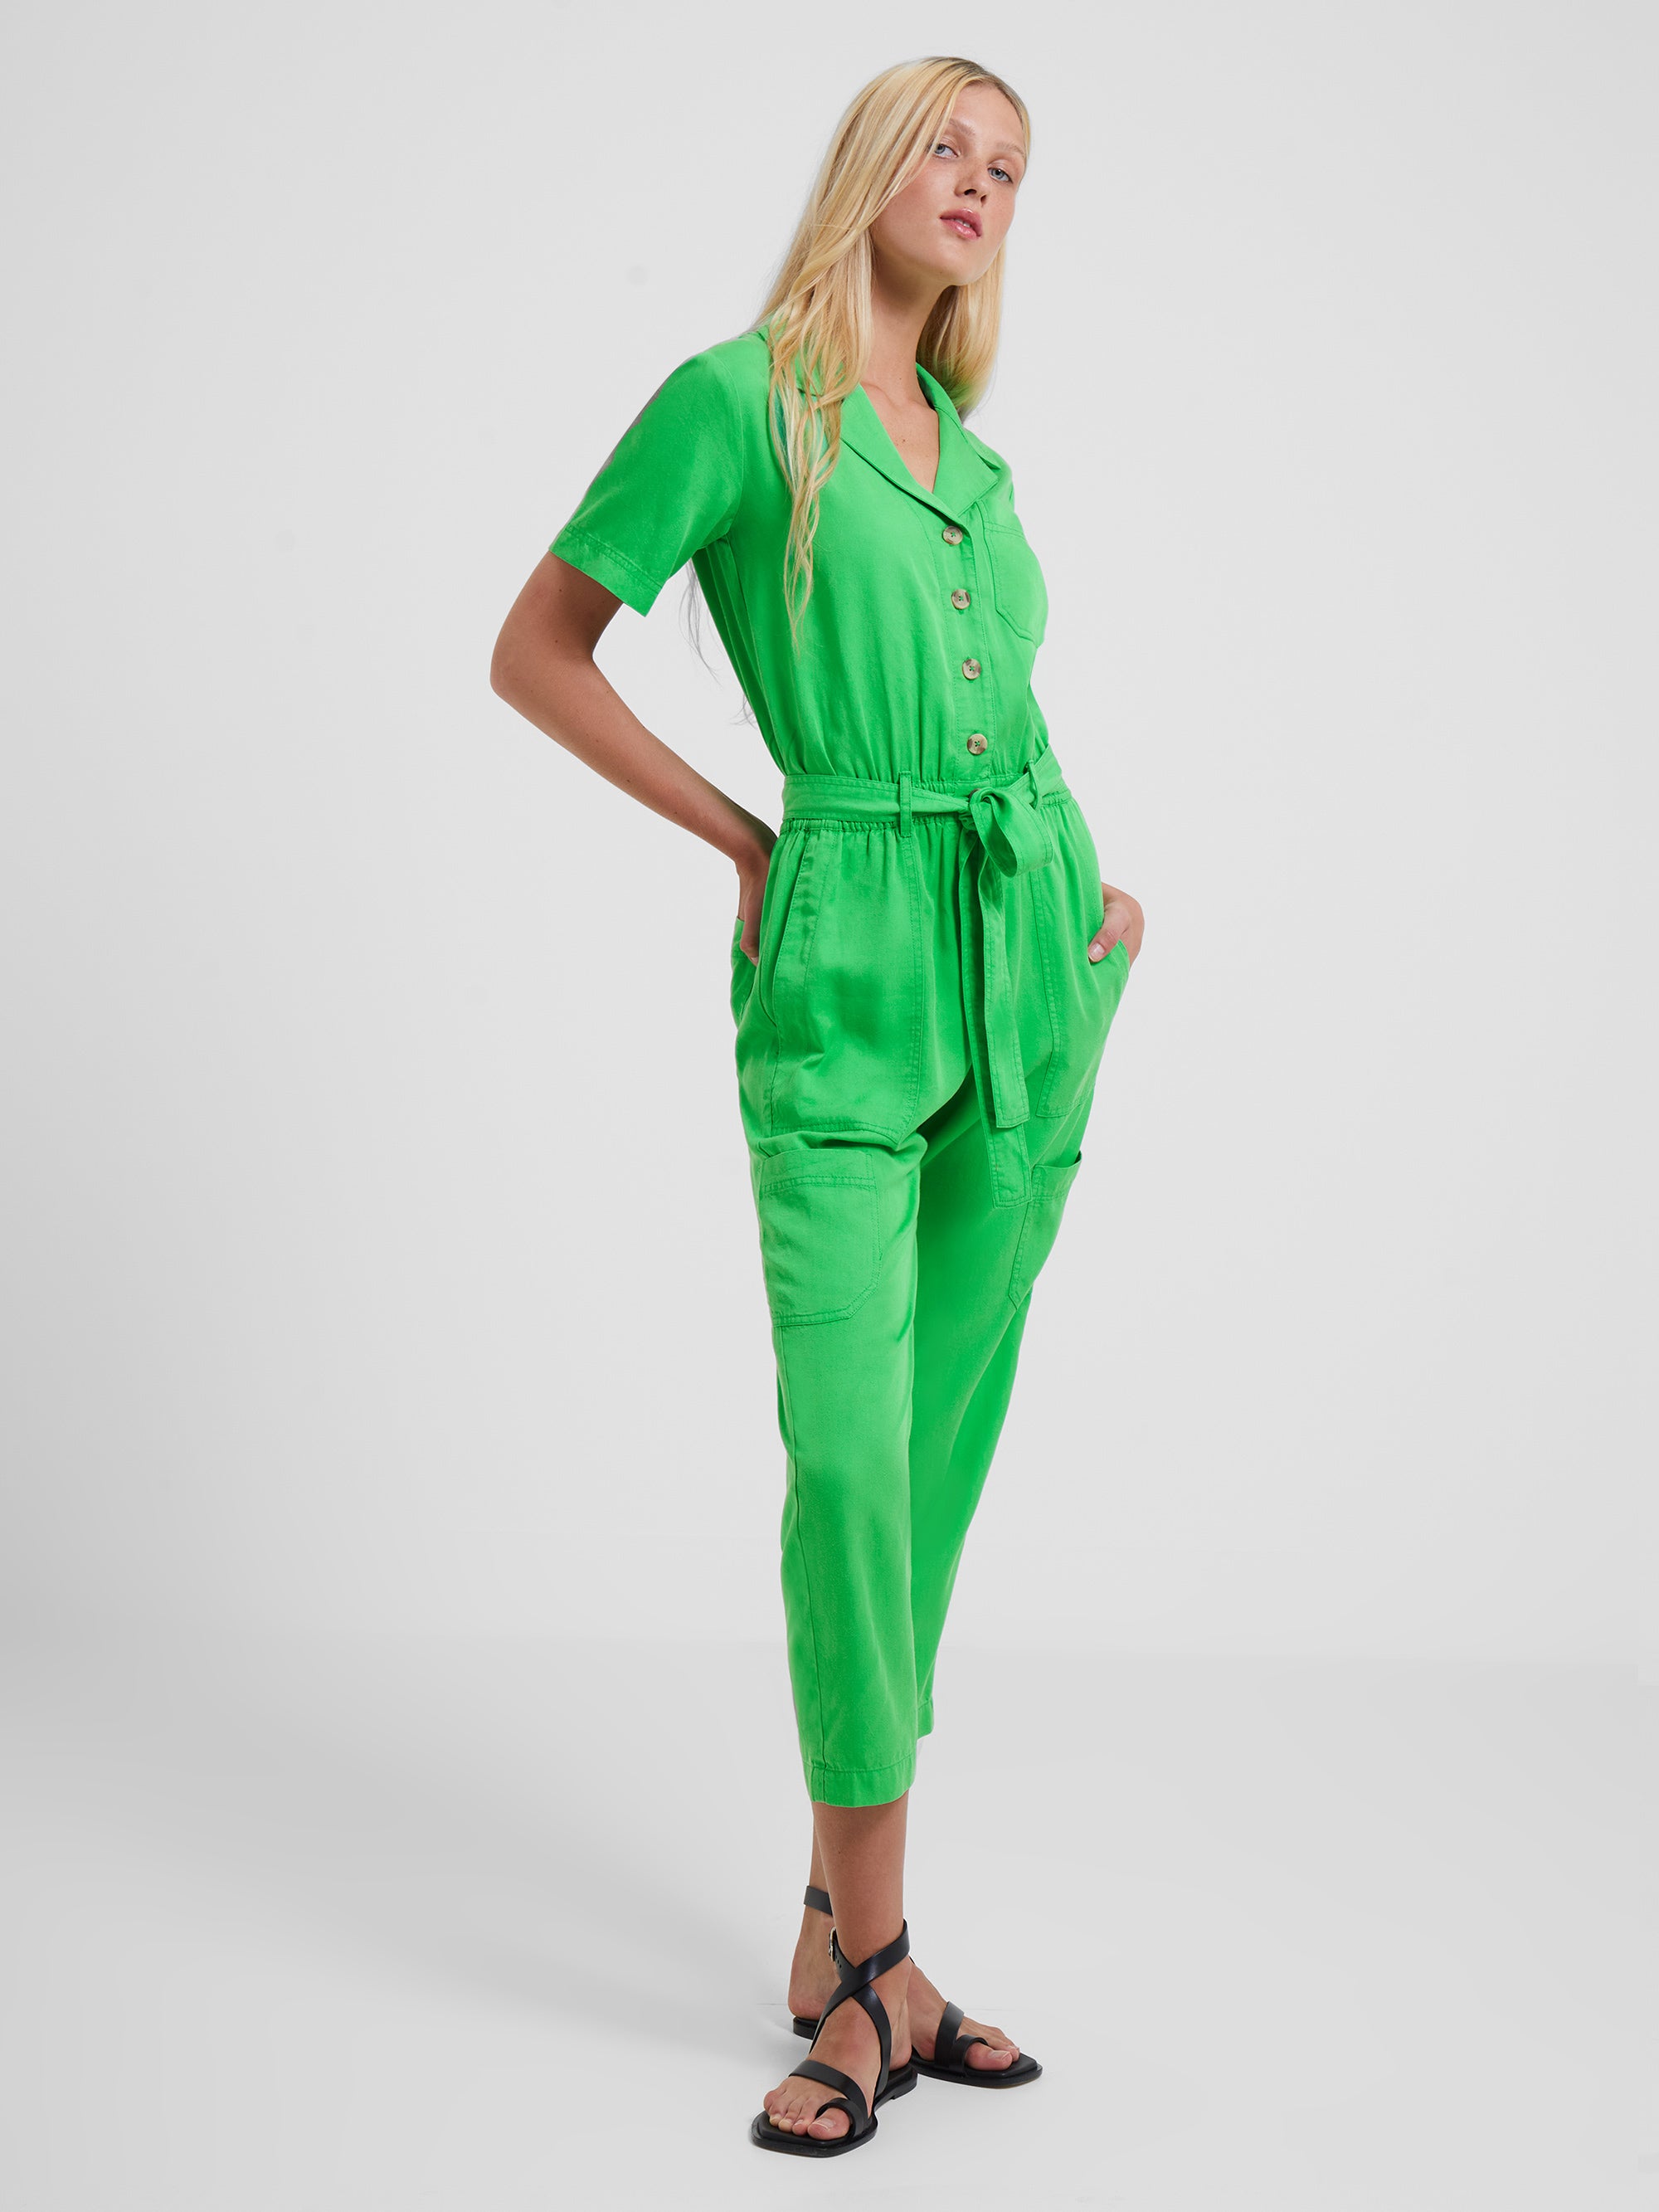 French Connection - Elkie Twill Boiler Suit | French Connection |  Jumpsuits & Playsuits | Extra Small - Green - Size: XS